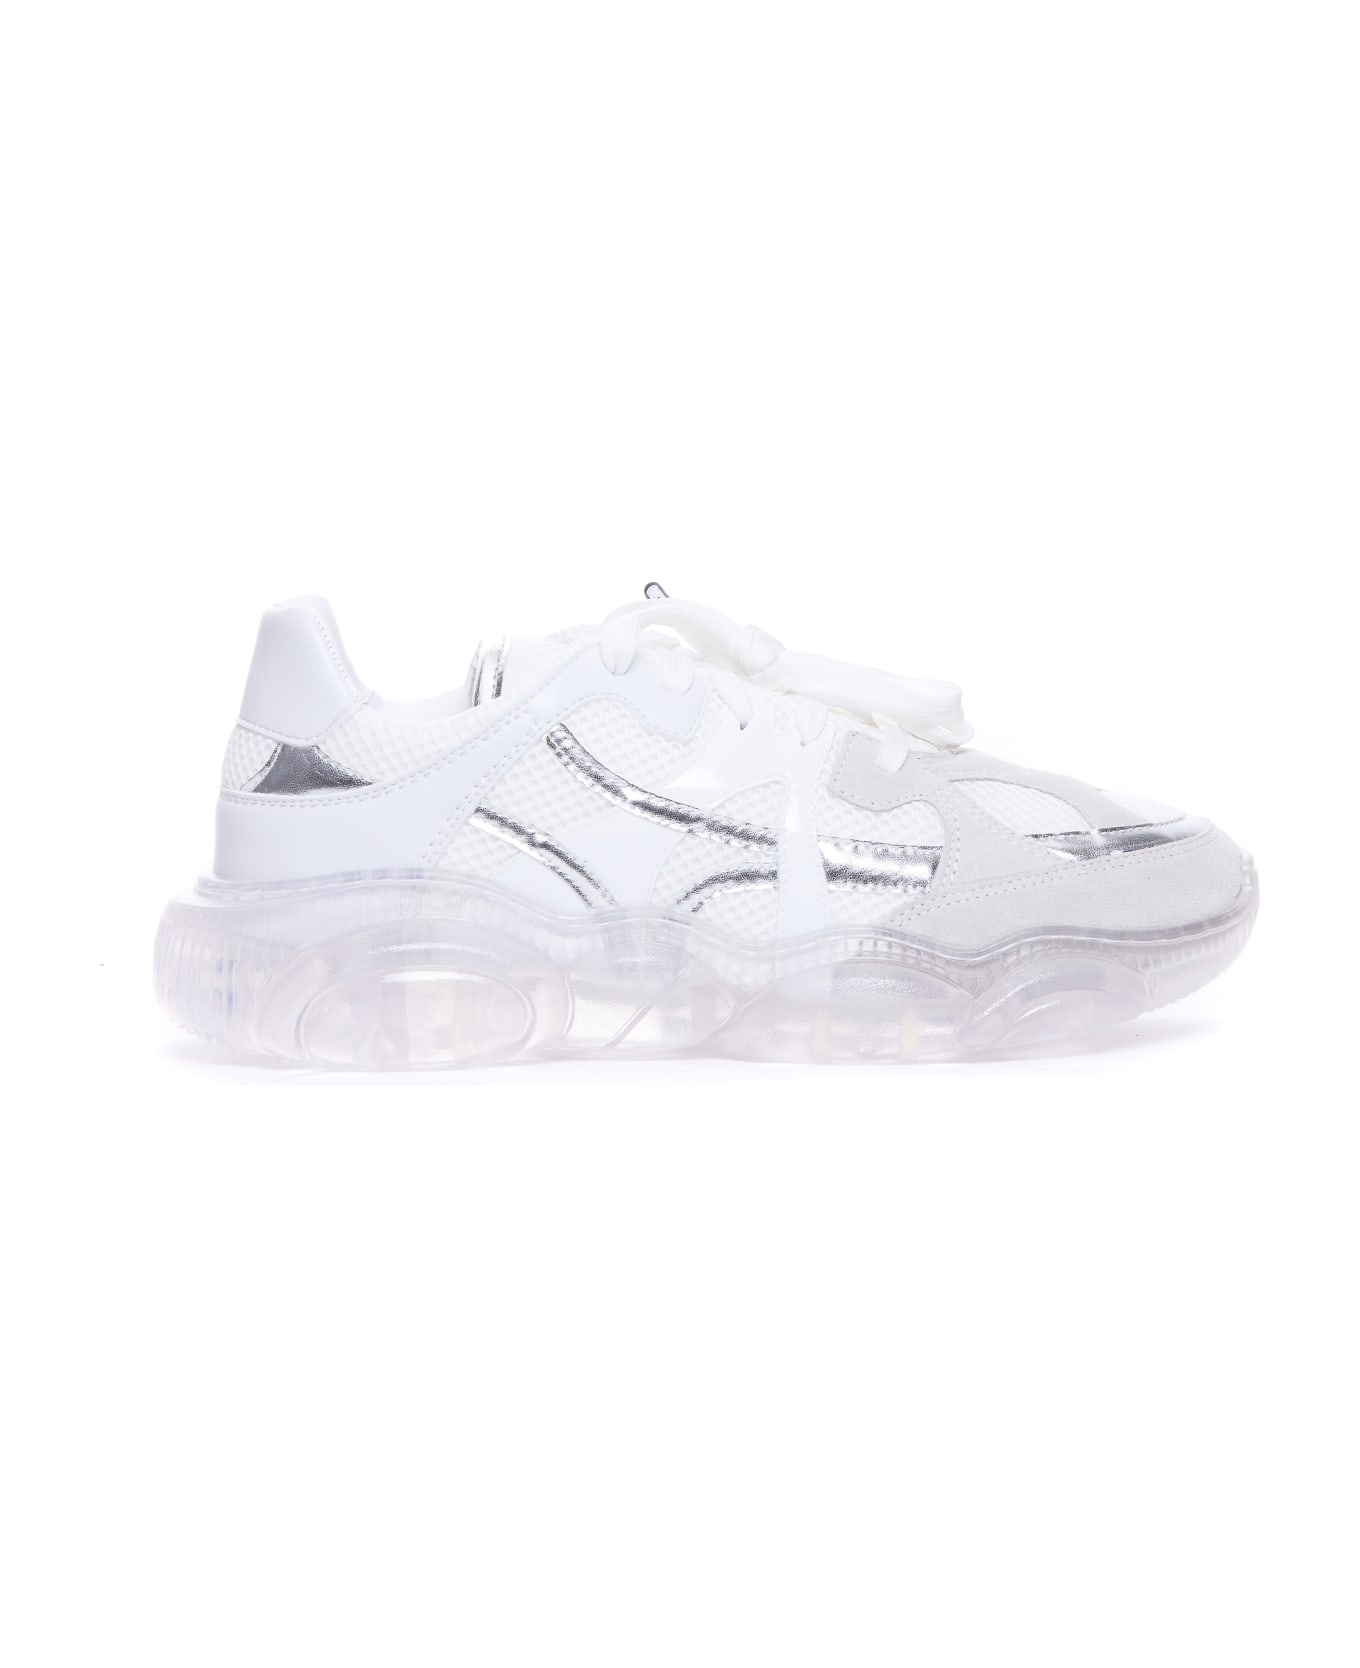 Moschino Teddy Shoes With Transparent Sole